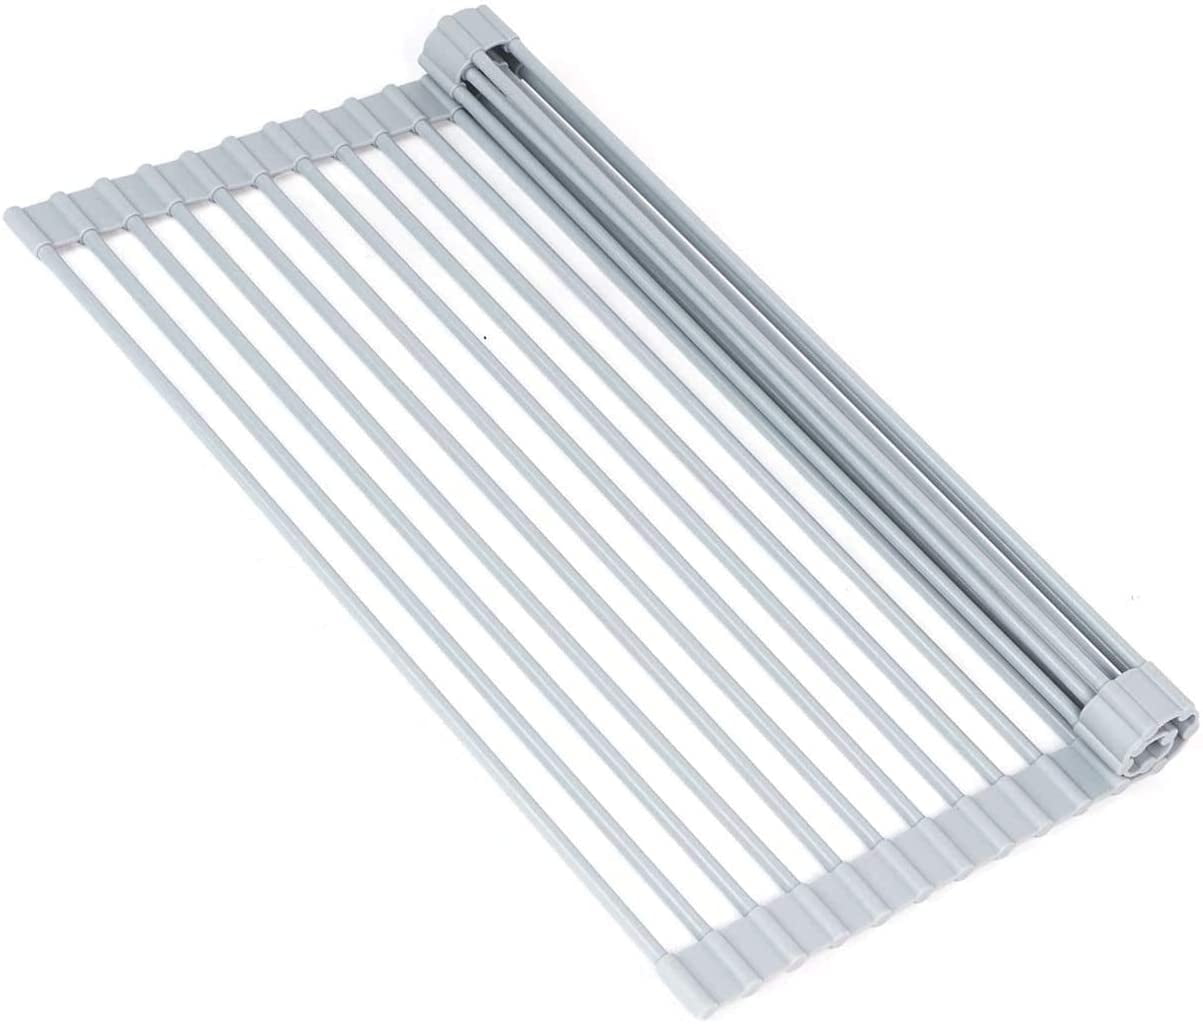 20.5" X 13" Large Stainless Steel Rack, Roll-up Dish Drying Rack Over The Sink 